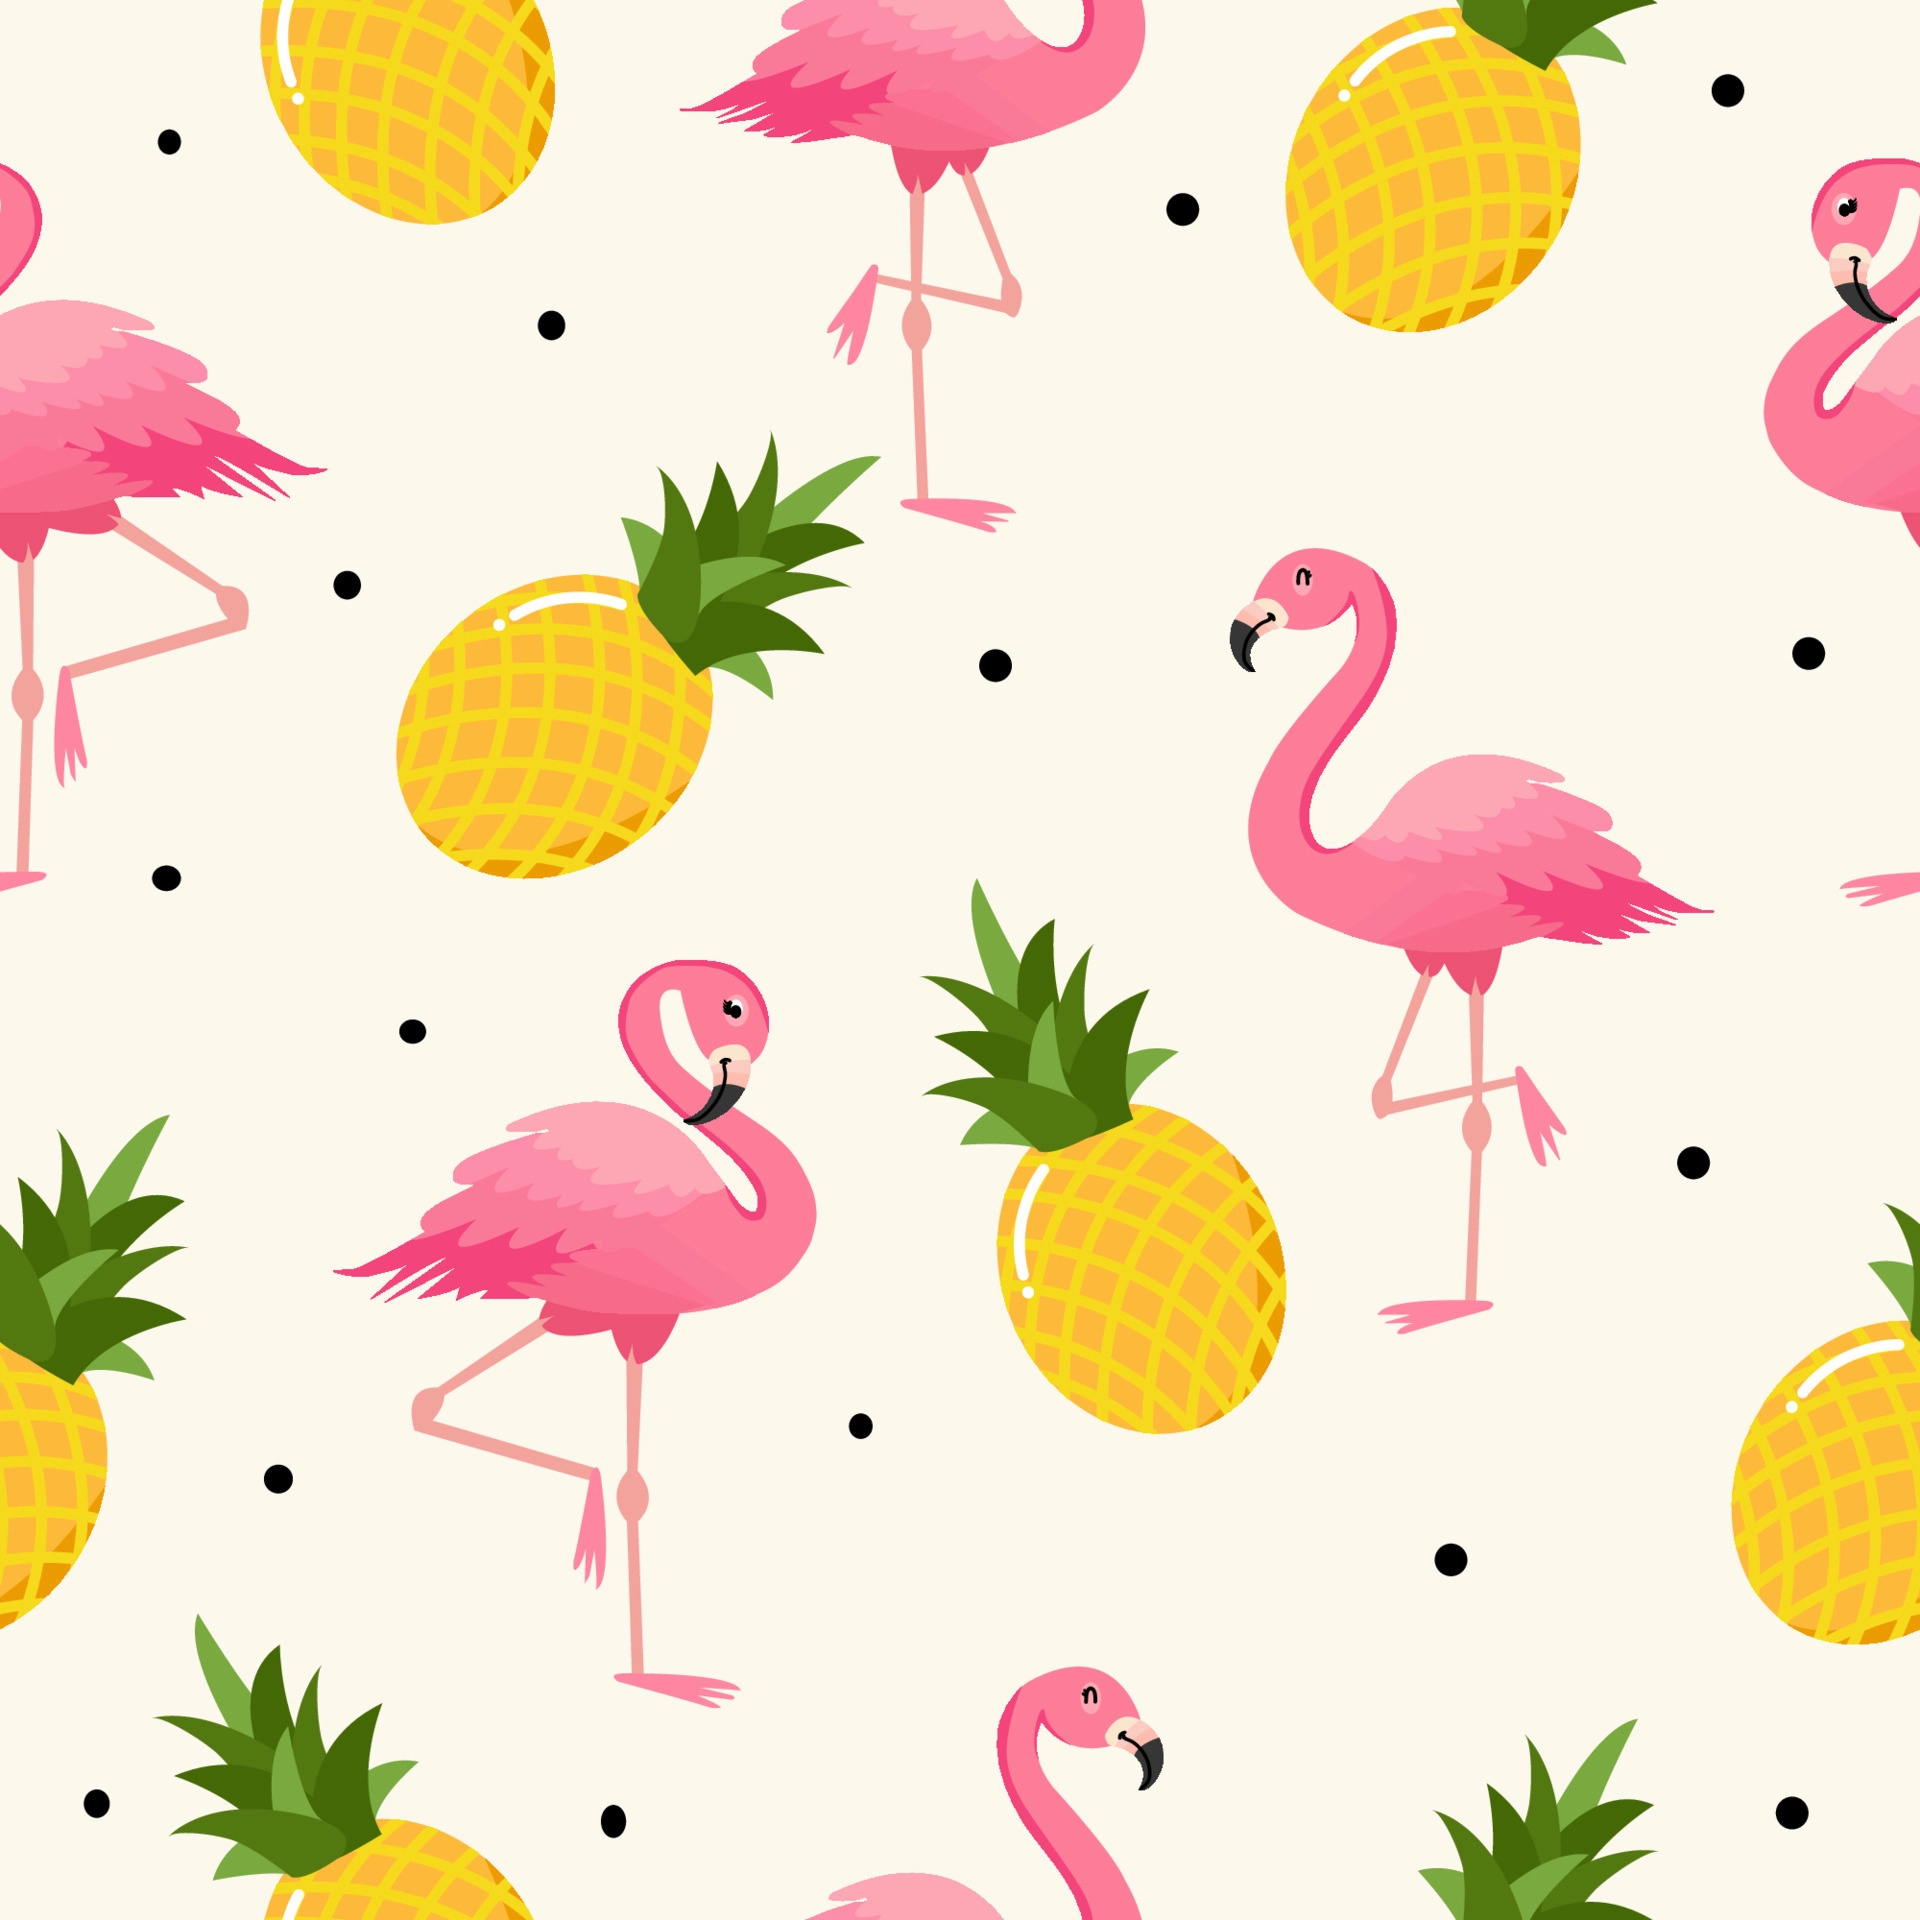 1920x1920 Flamingo and Pineapple fruit seamless pattern background,Vector illustration for textile print, wallpaper, fashion design 4706877 Vector Art